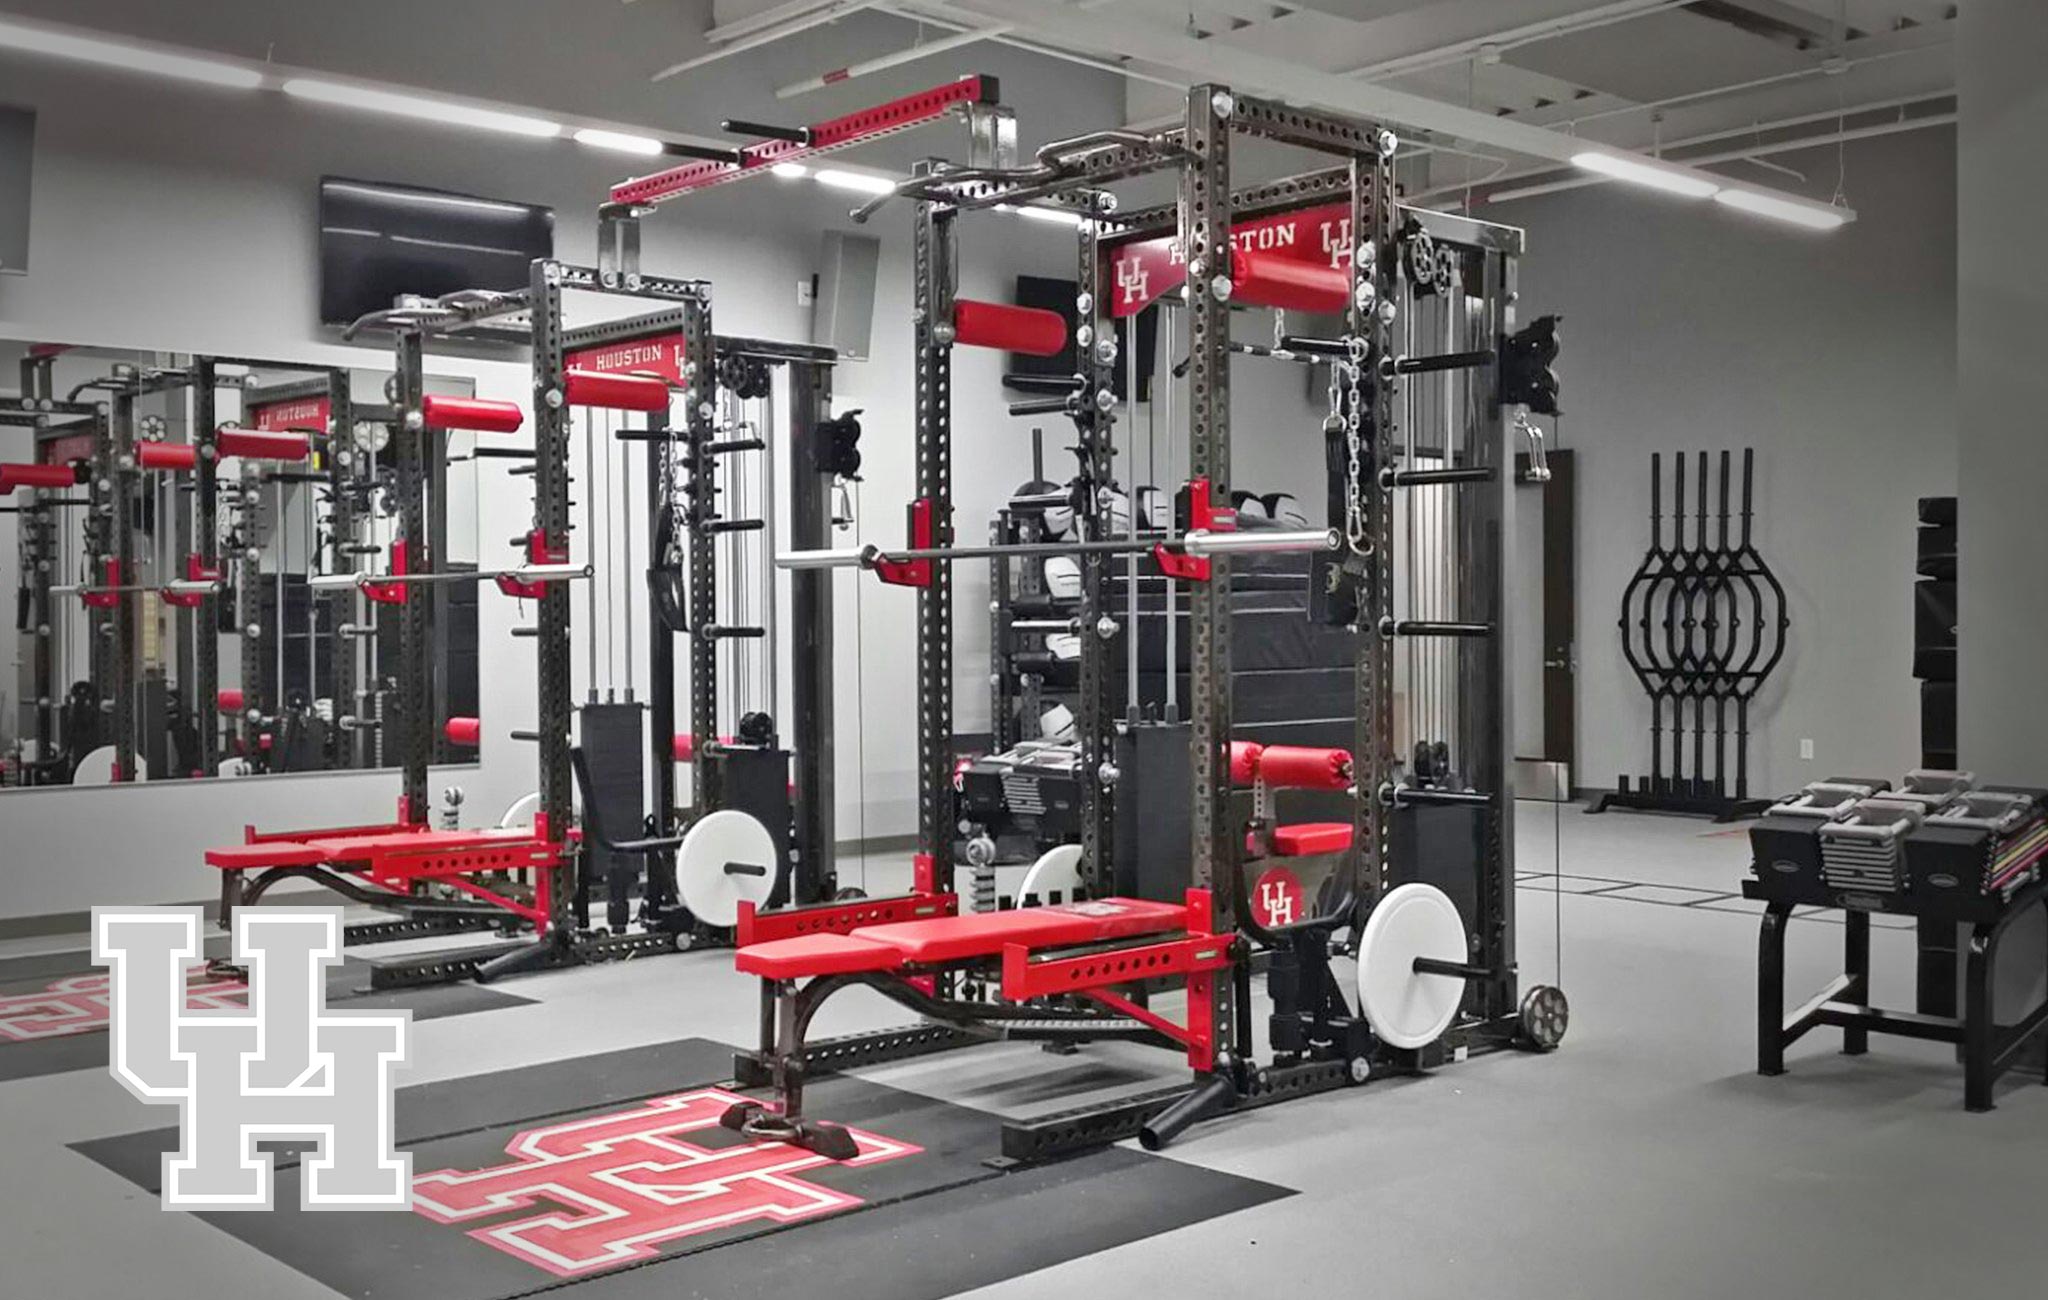 University of Houston Sorinex strength and conditioning facility